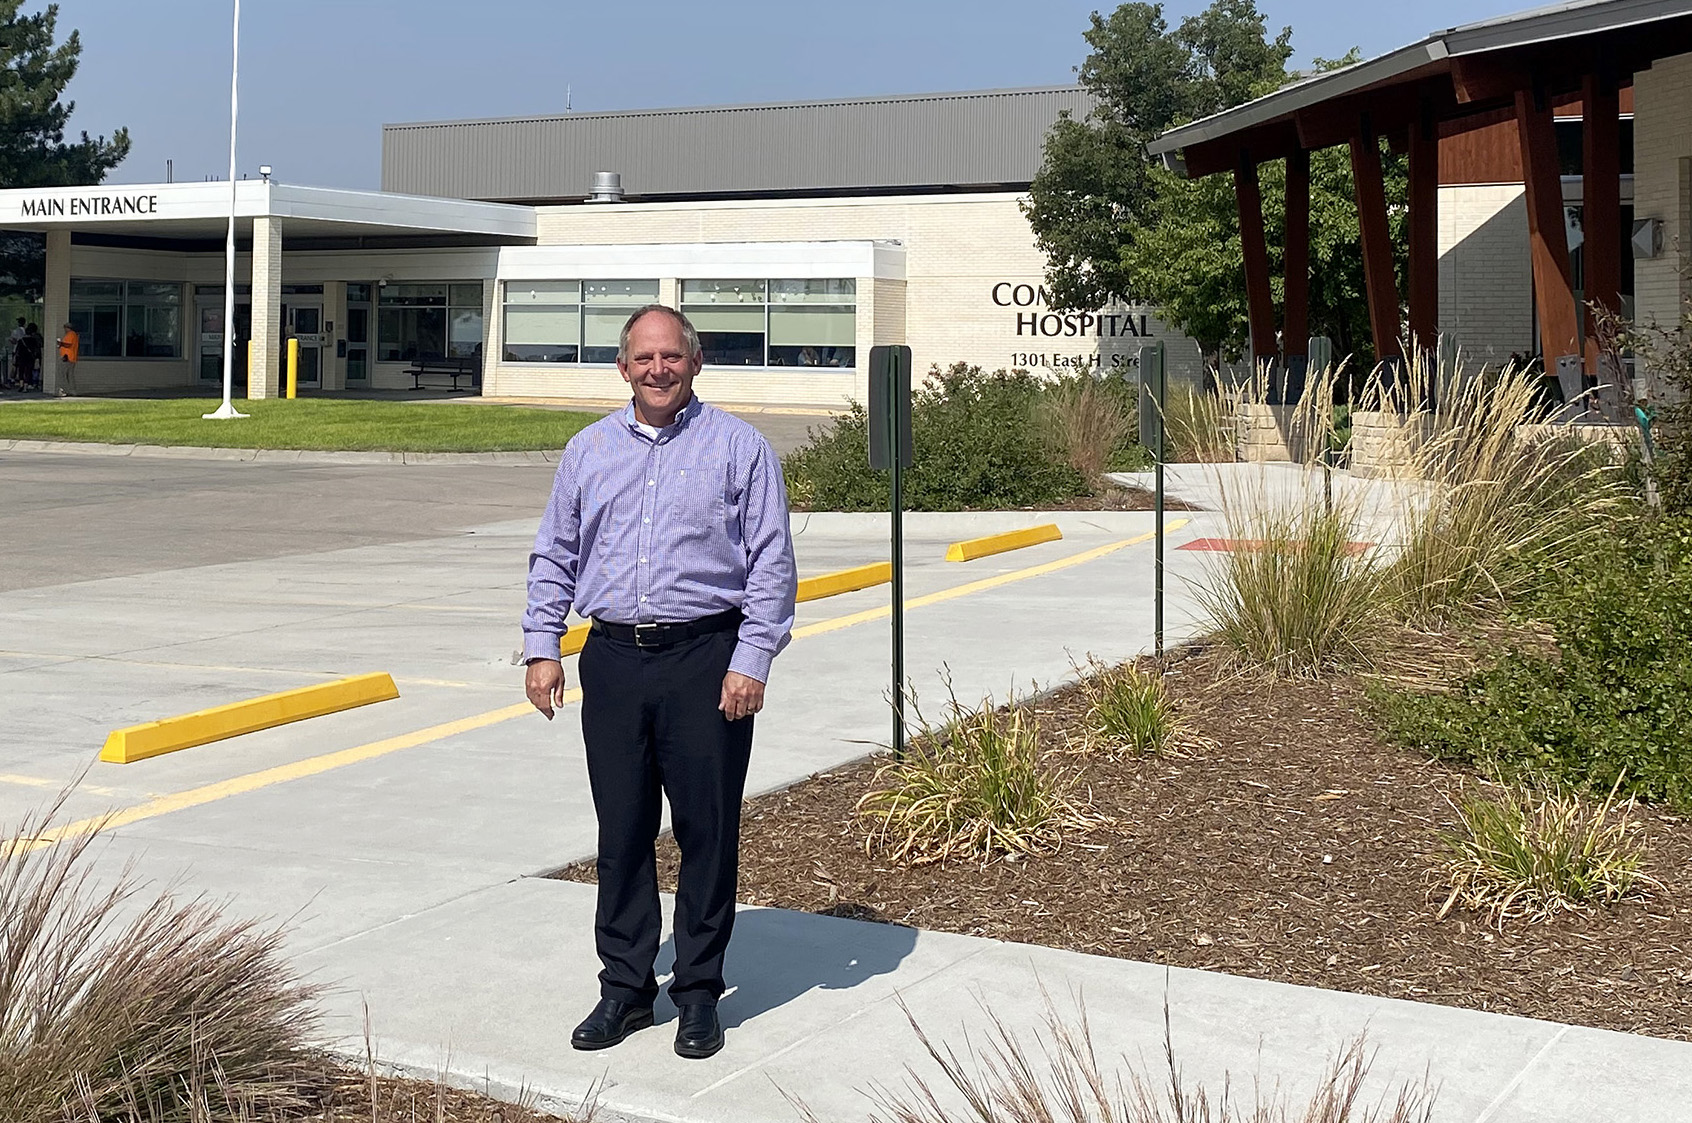 Troy Bruntz, president and CEO of Community Hospital in McCook, expects to see more students interested in rural health care careers once the UNK-UNMC Rural Health Education Building opens in Kearney. “If we’re going to be successful, this is the type of thing we’re going to have to do,” he said. (Courtesy photo)